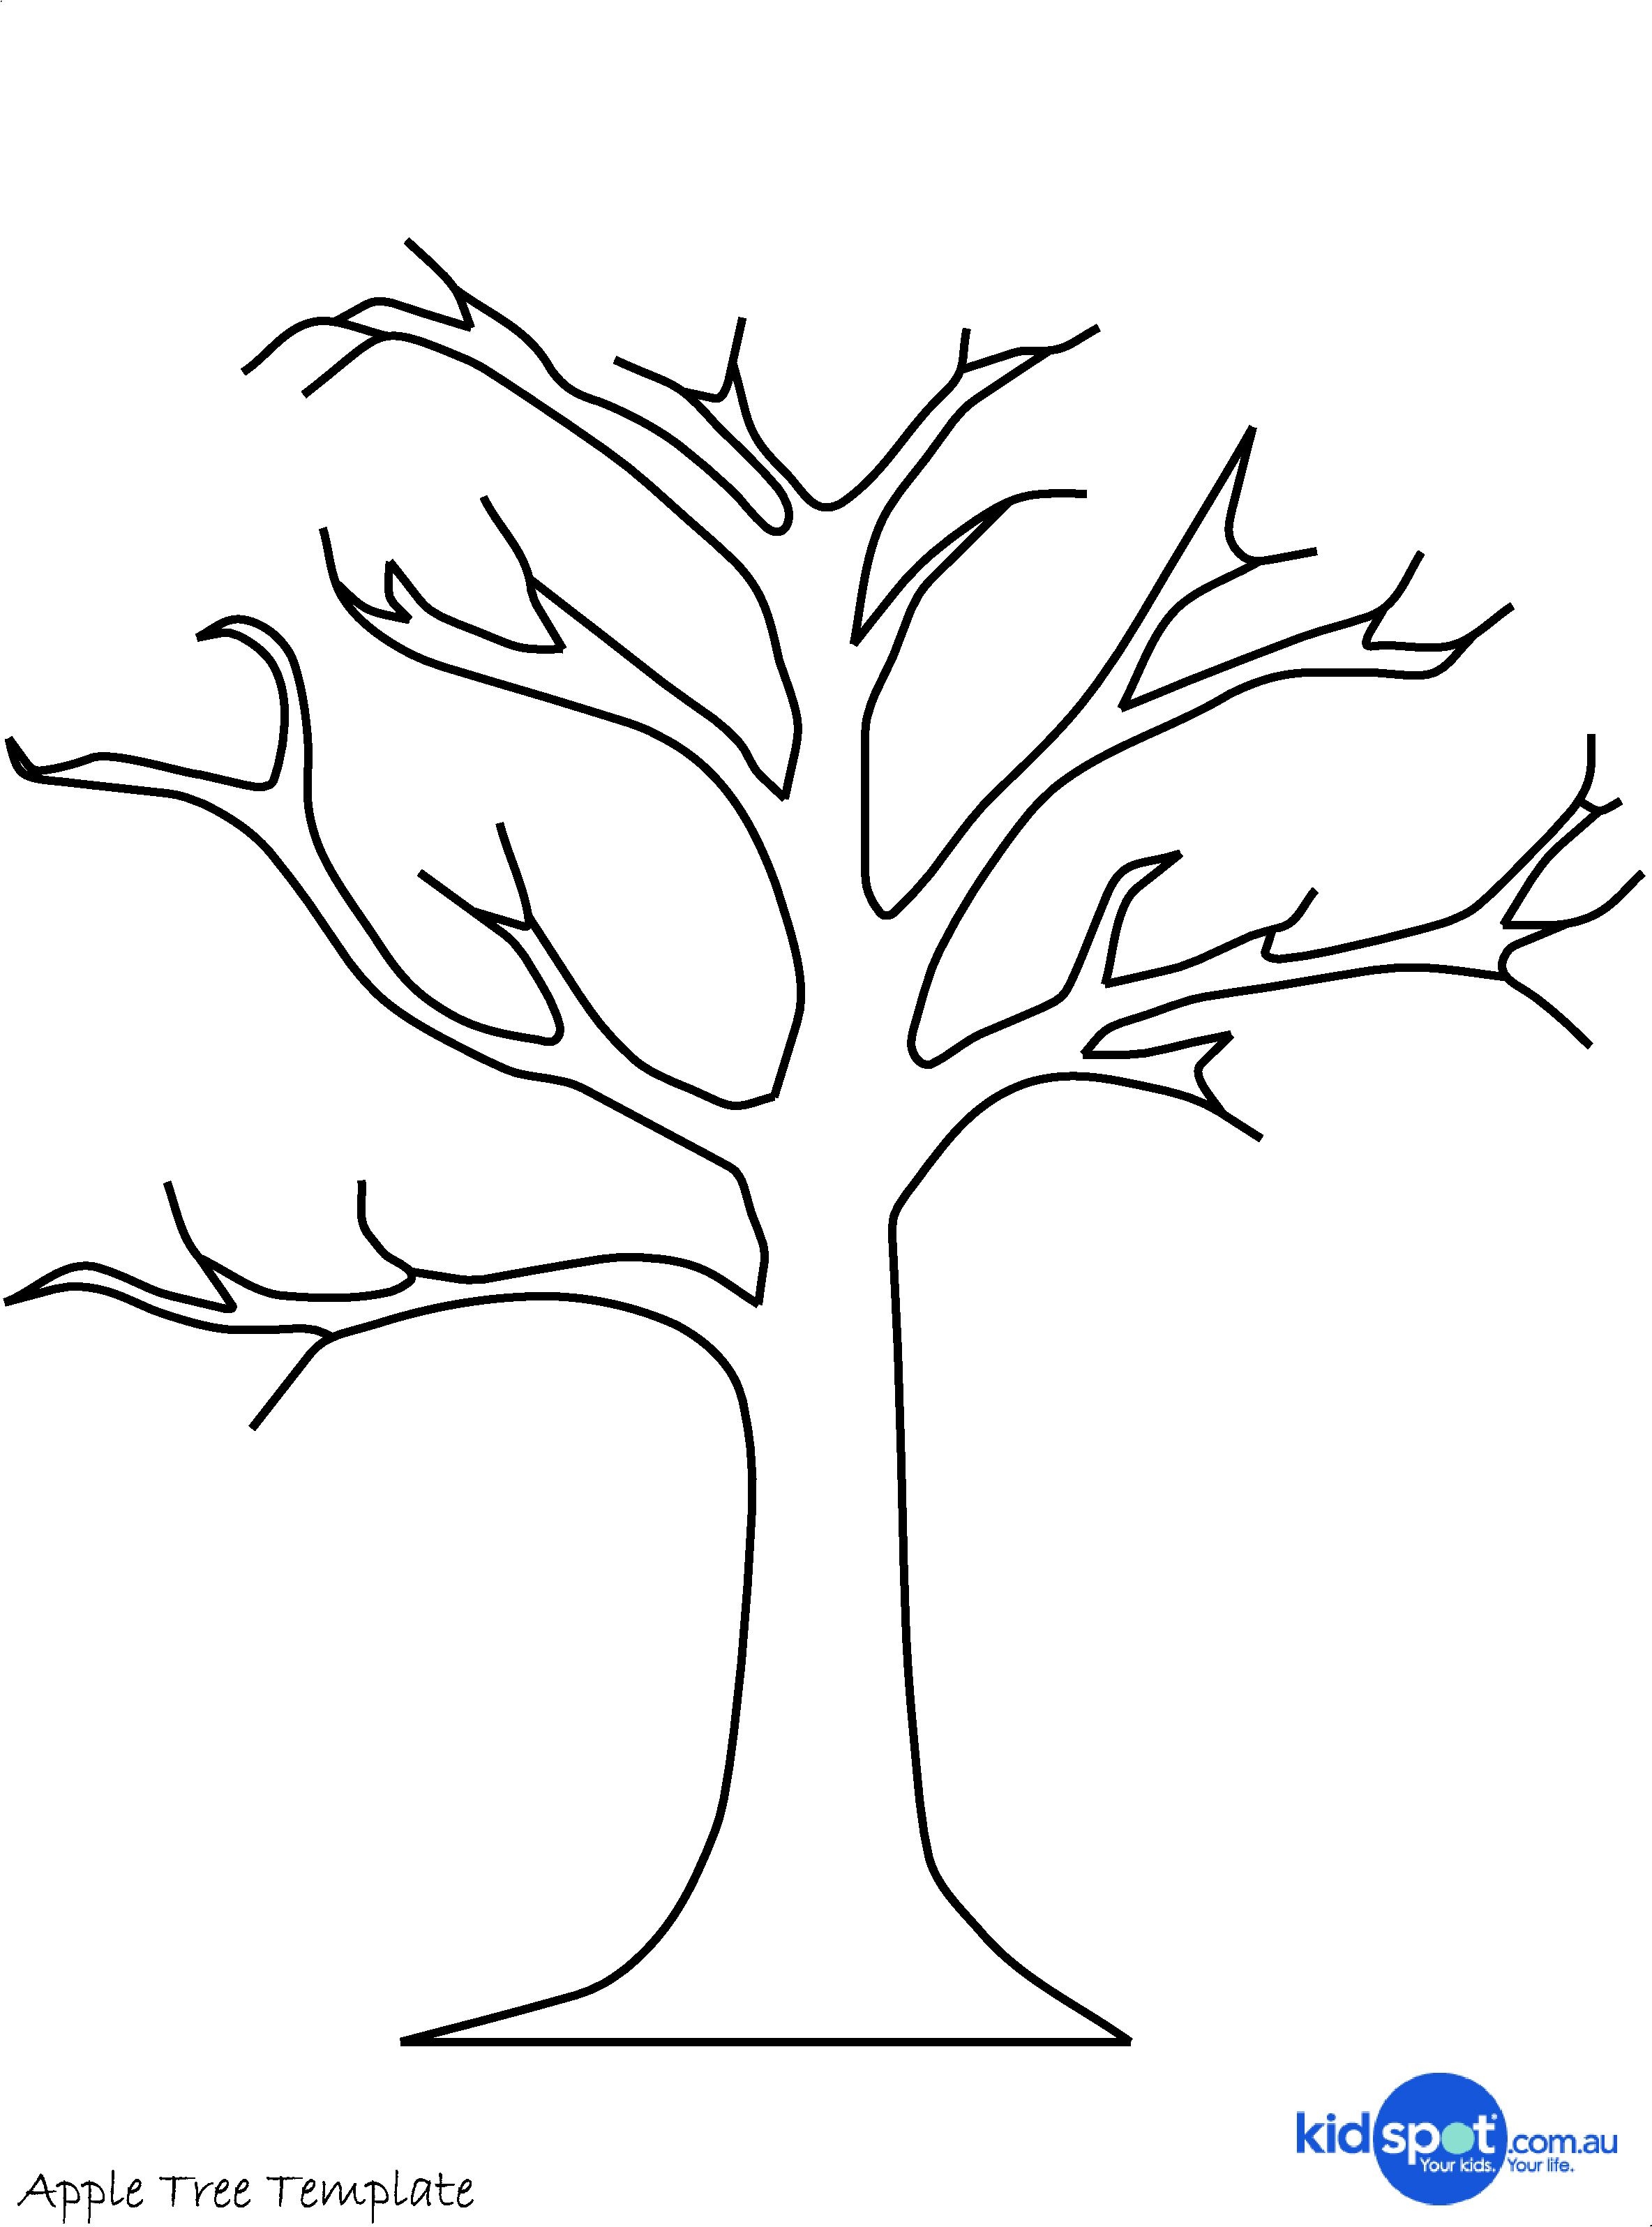 Bare Tree Coloring Page at GetDrawings Free download